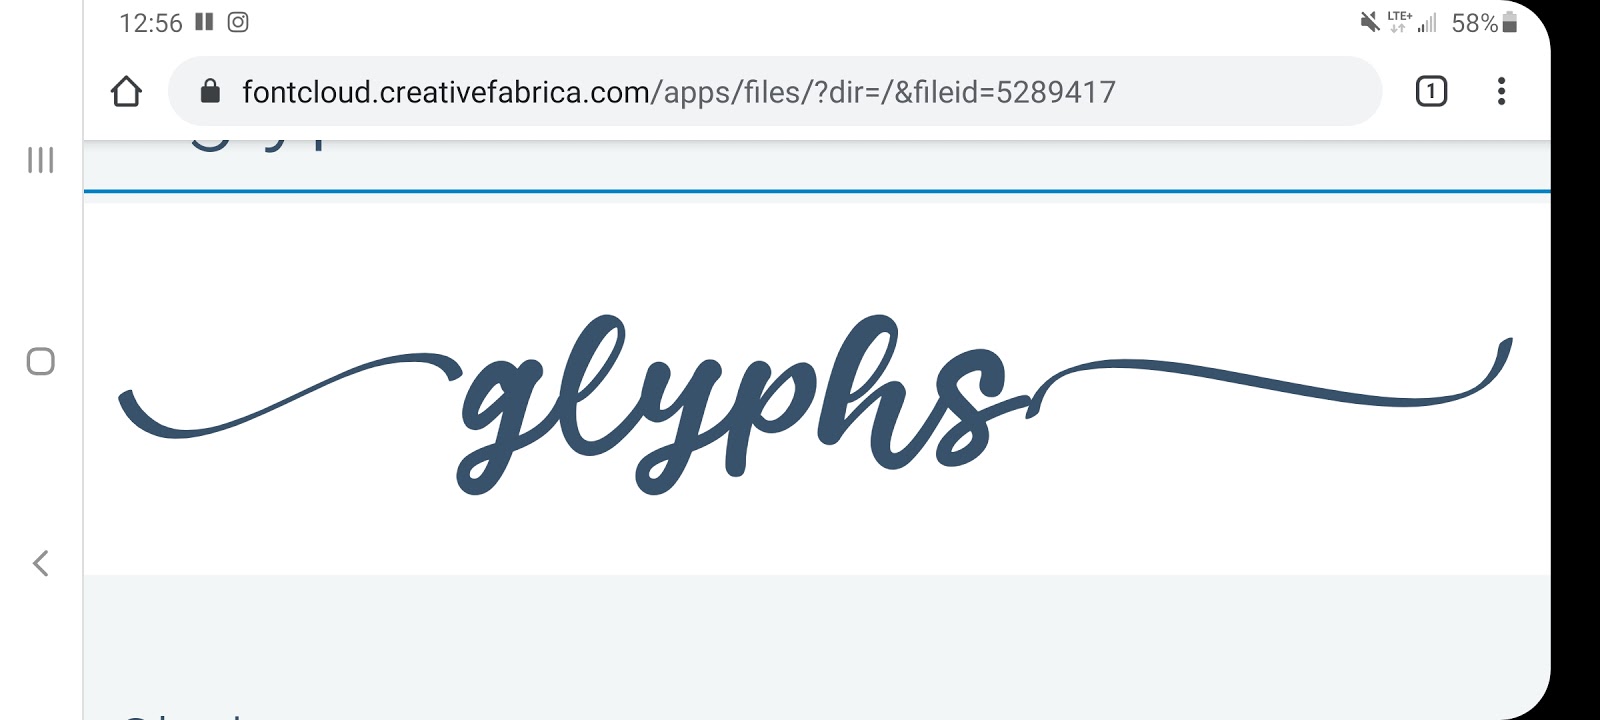 Download Free How To Use Font Glyphs On Android Ipad Too Fonts Typography